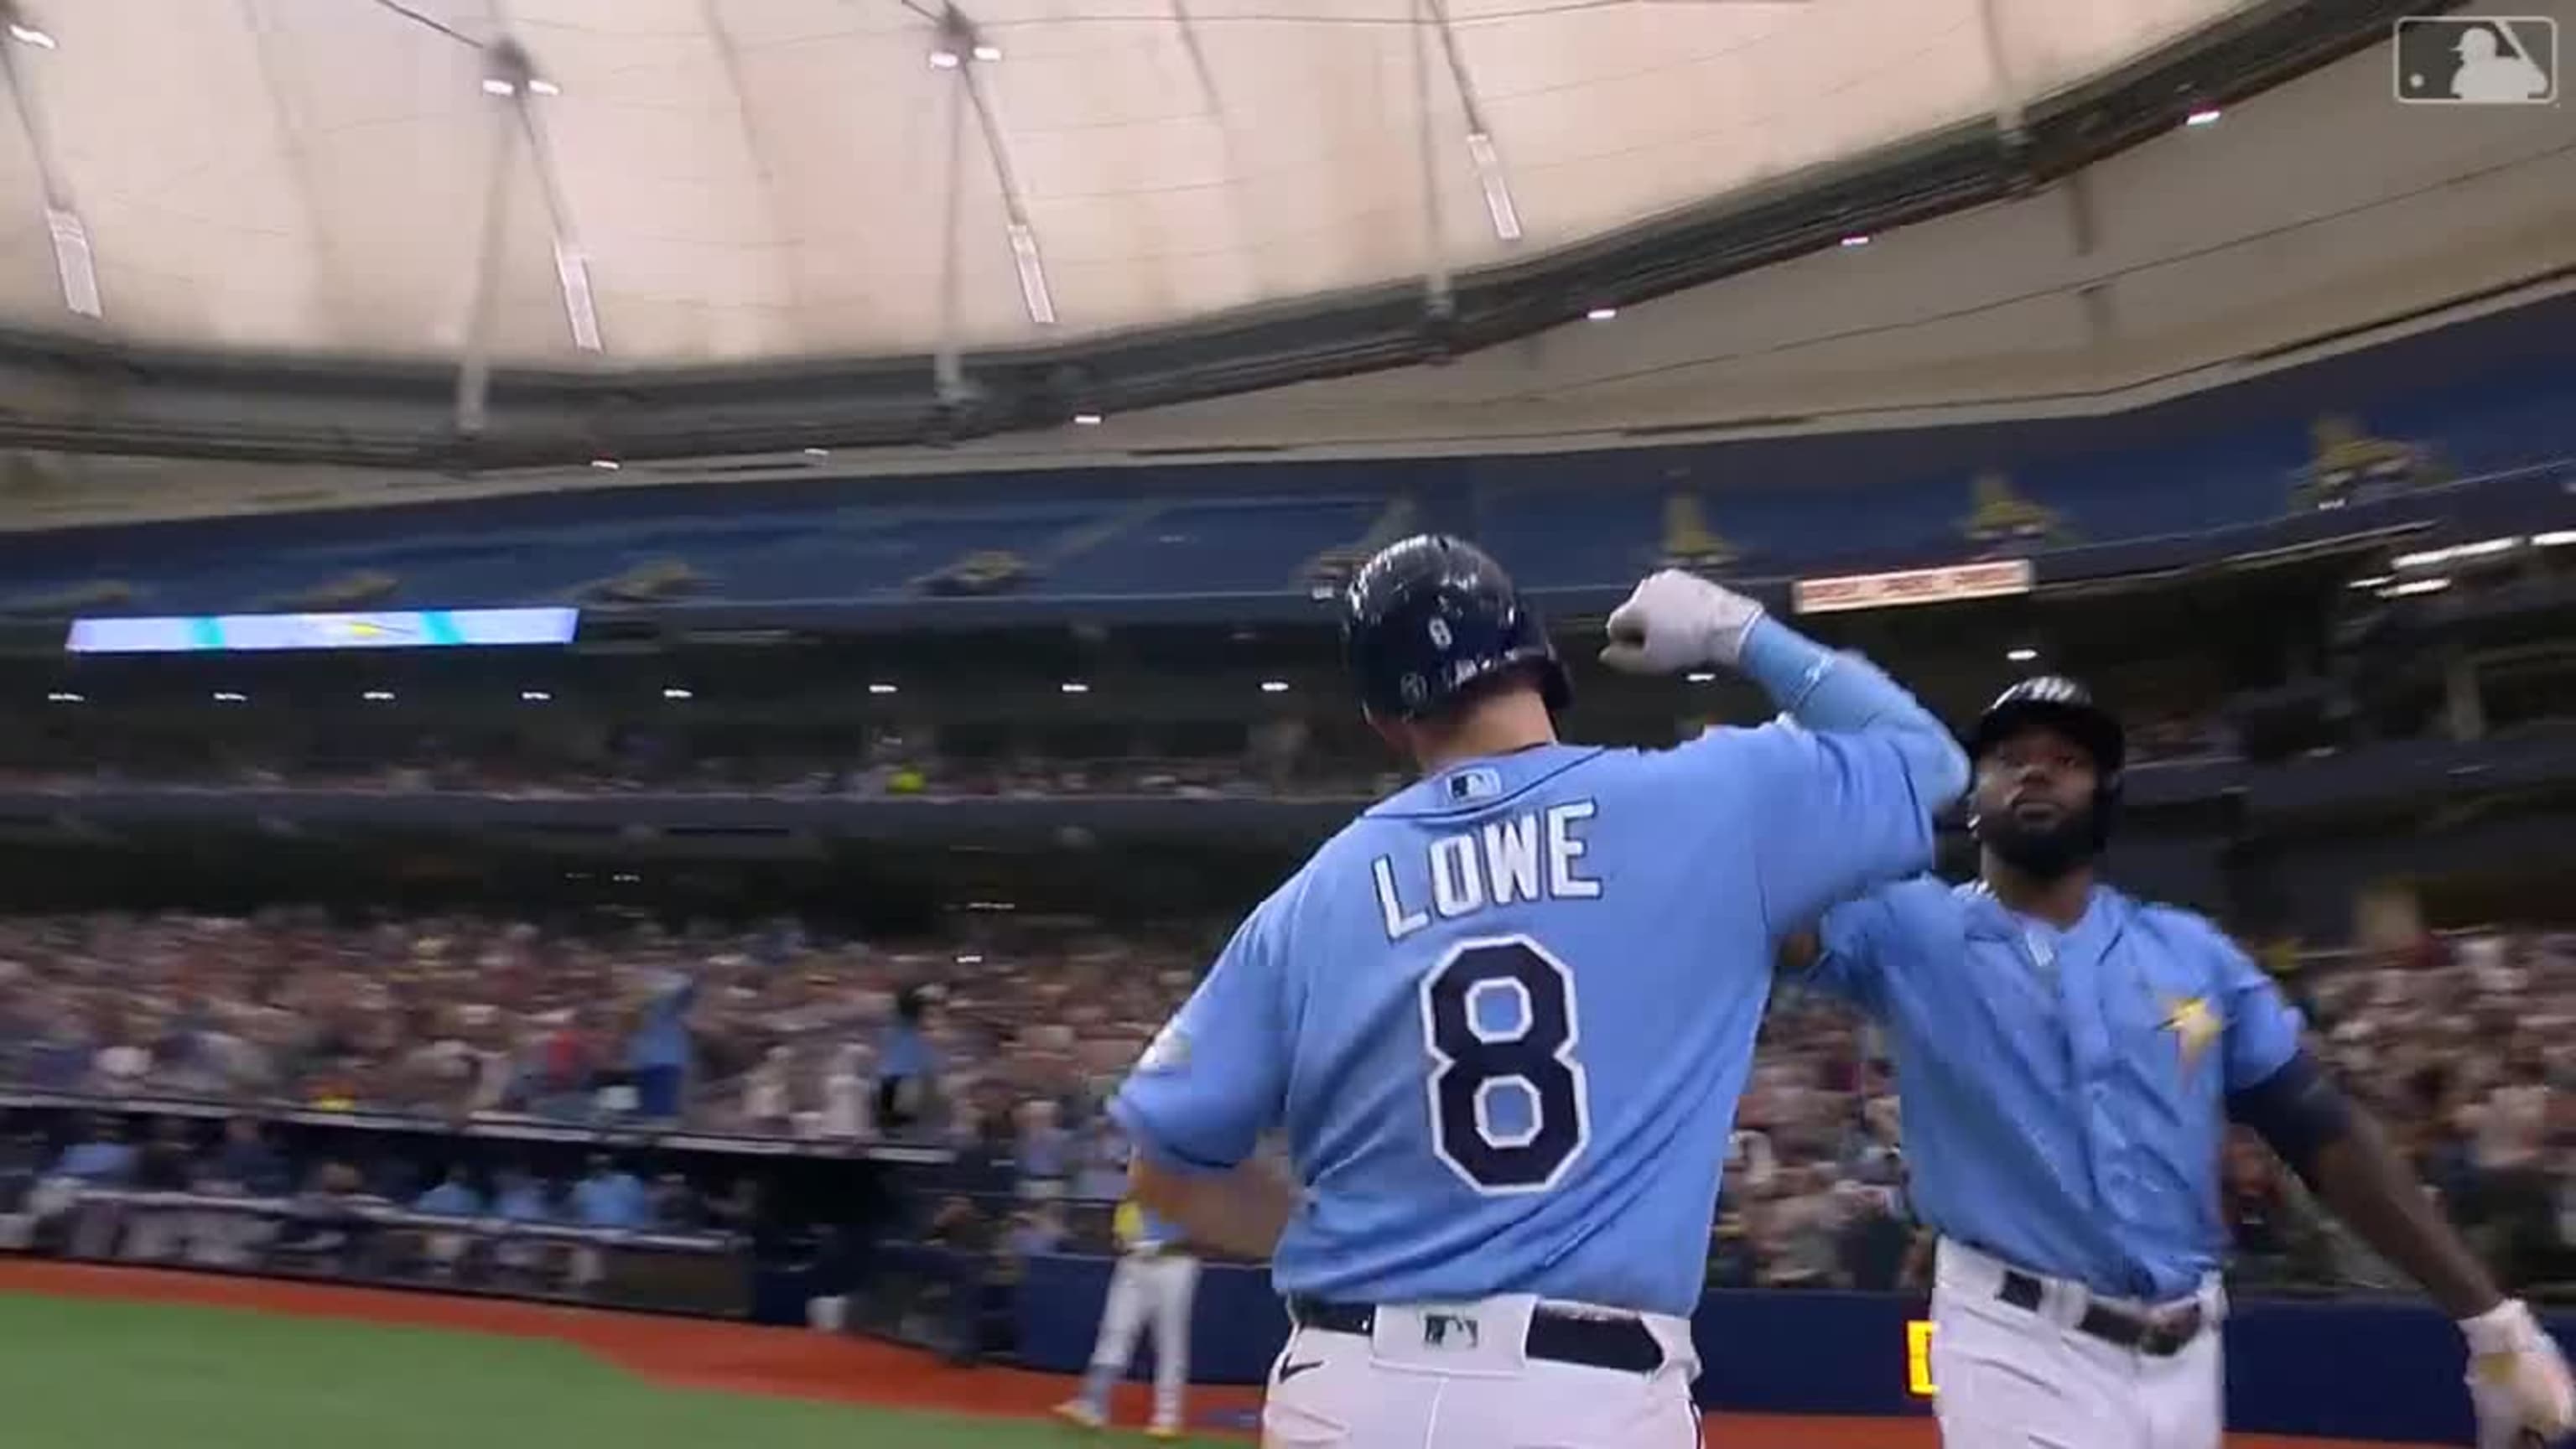 Rays tie record with 13-0 start, rally to beat Red Sox 9-3 - NBC Sports